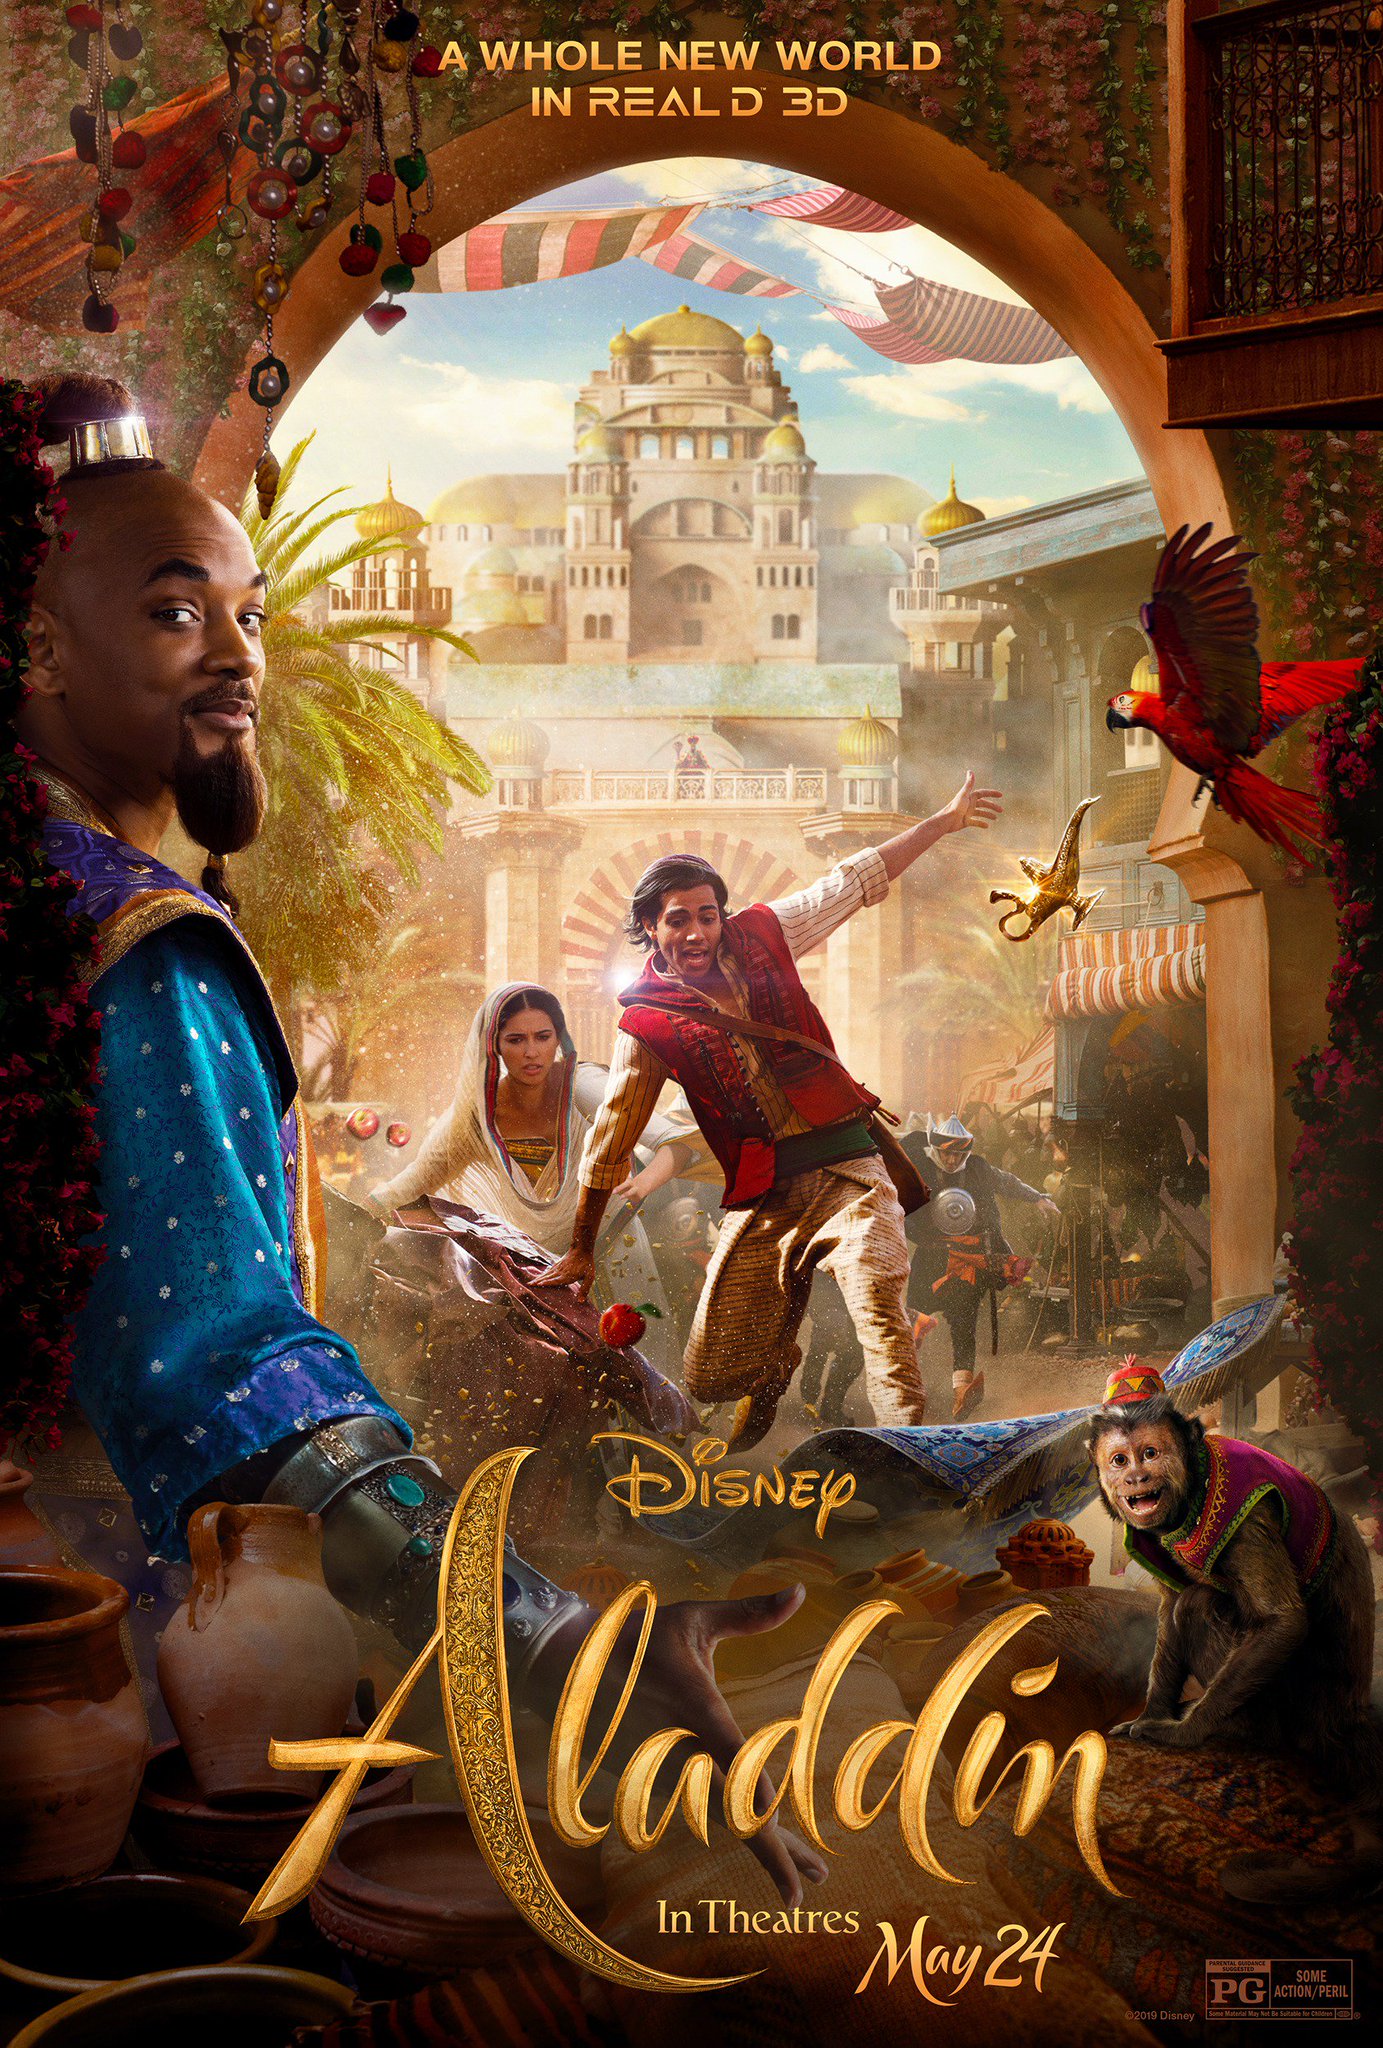 Disney S Aladdin Check Out This Exclusive Reald3d Poster For Disney S Aladdin And See The Film In Theaters May 24 T Co Oykdnfqmyd T Co Lowoq9r5li